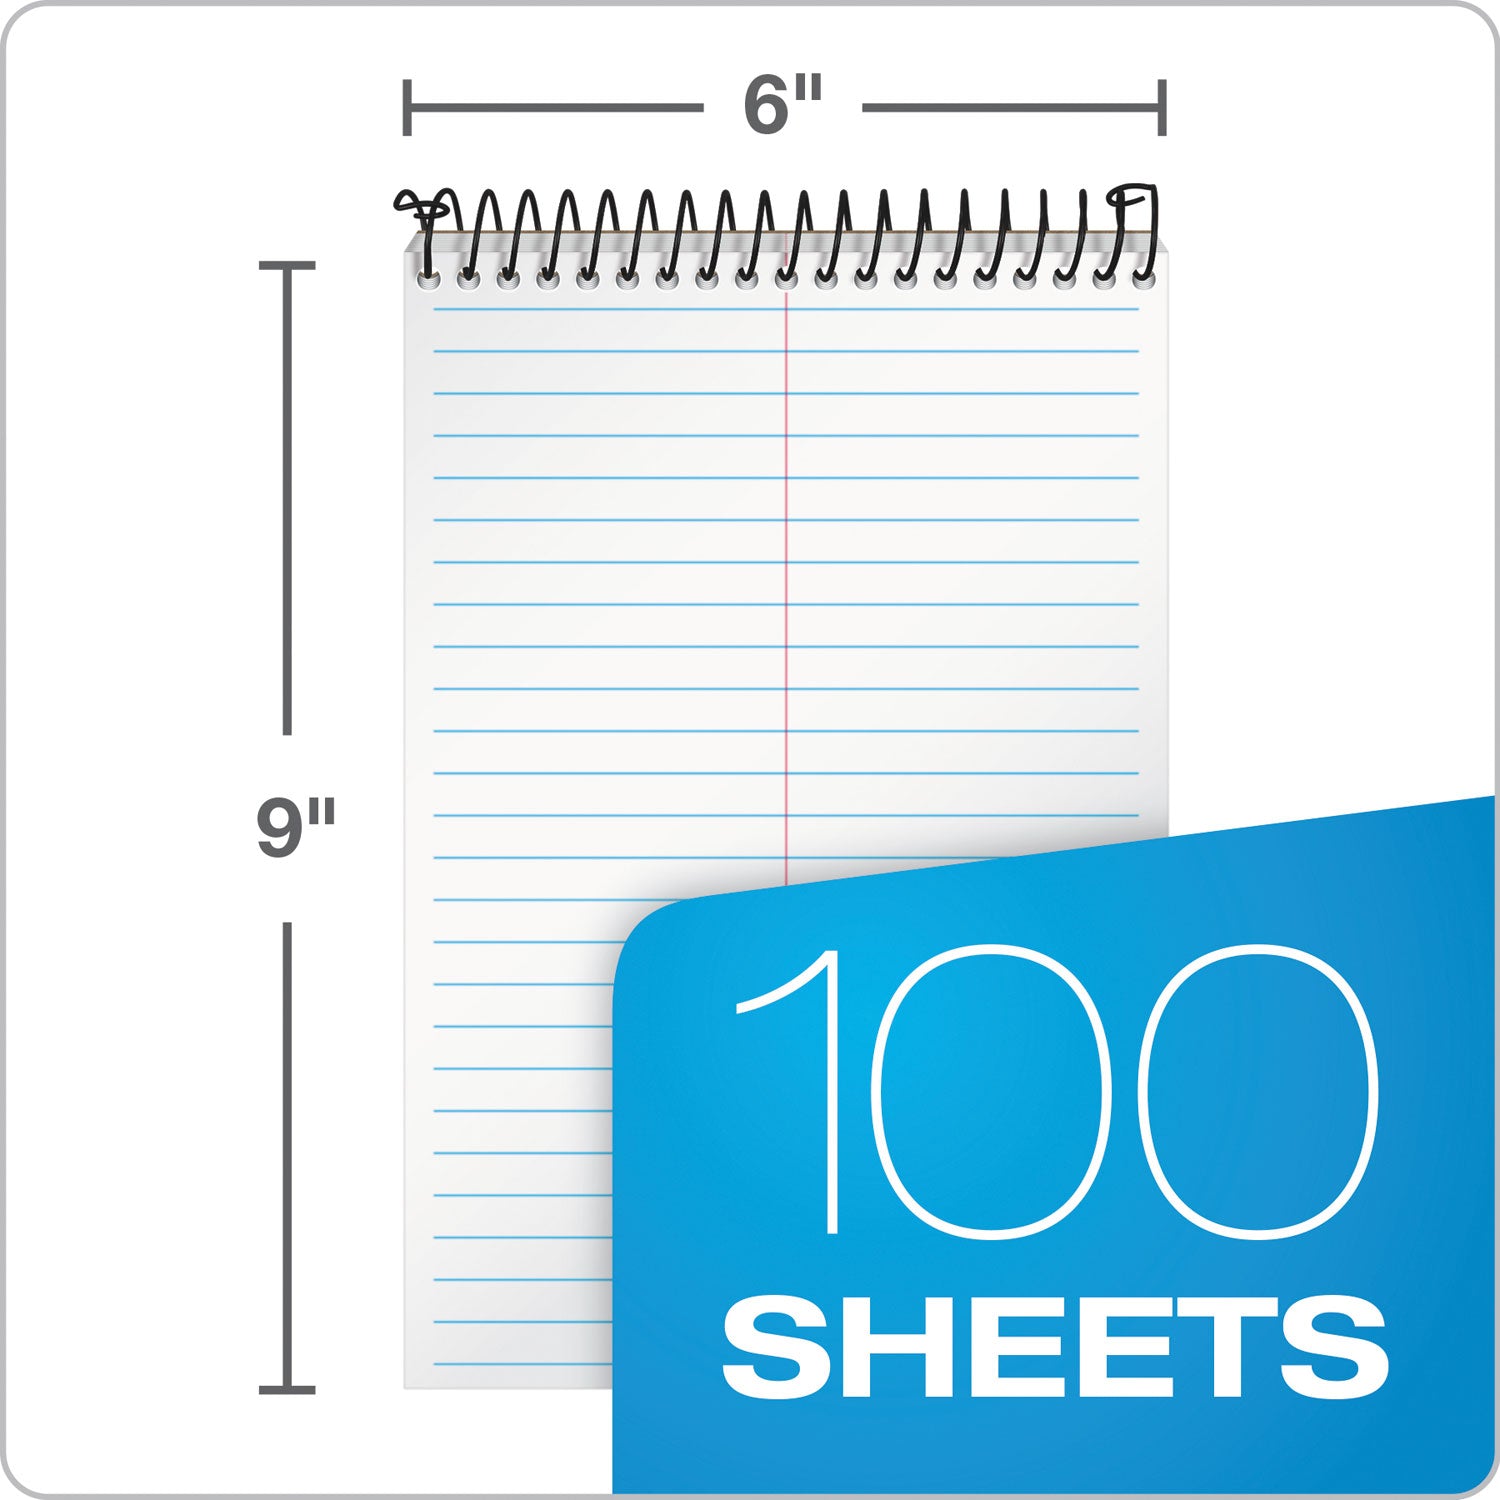 Docket Gold Steno Pads, Gregg Rule, Frosted White Cover, 100 White (Heavyweight 20 lb Bond) 6 x 9 Sheets - 